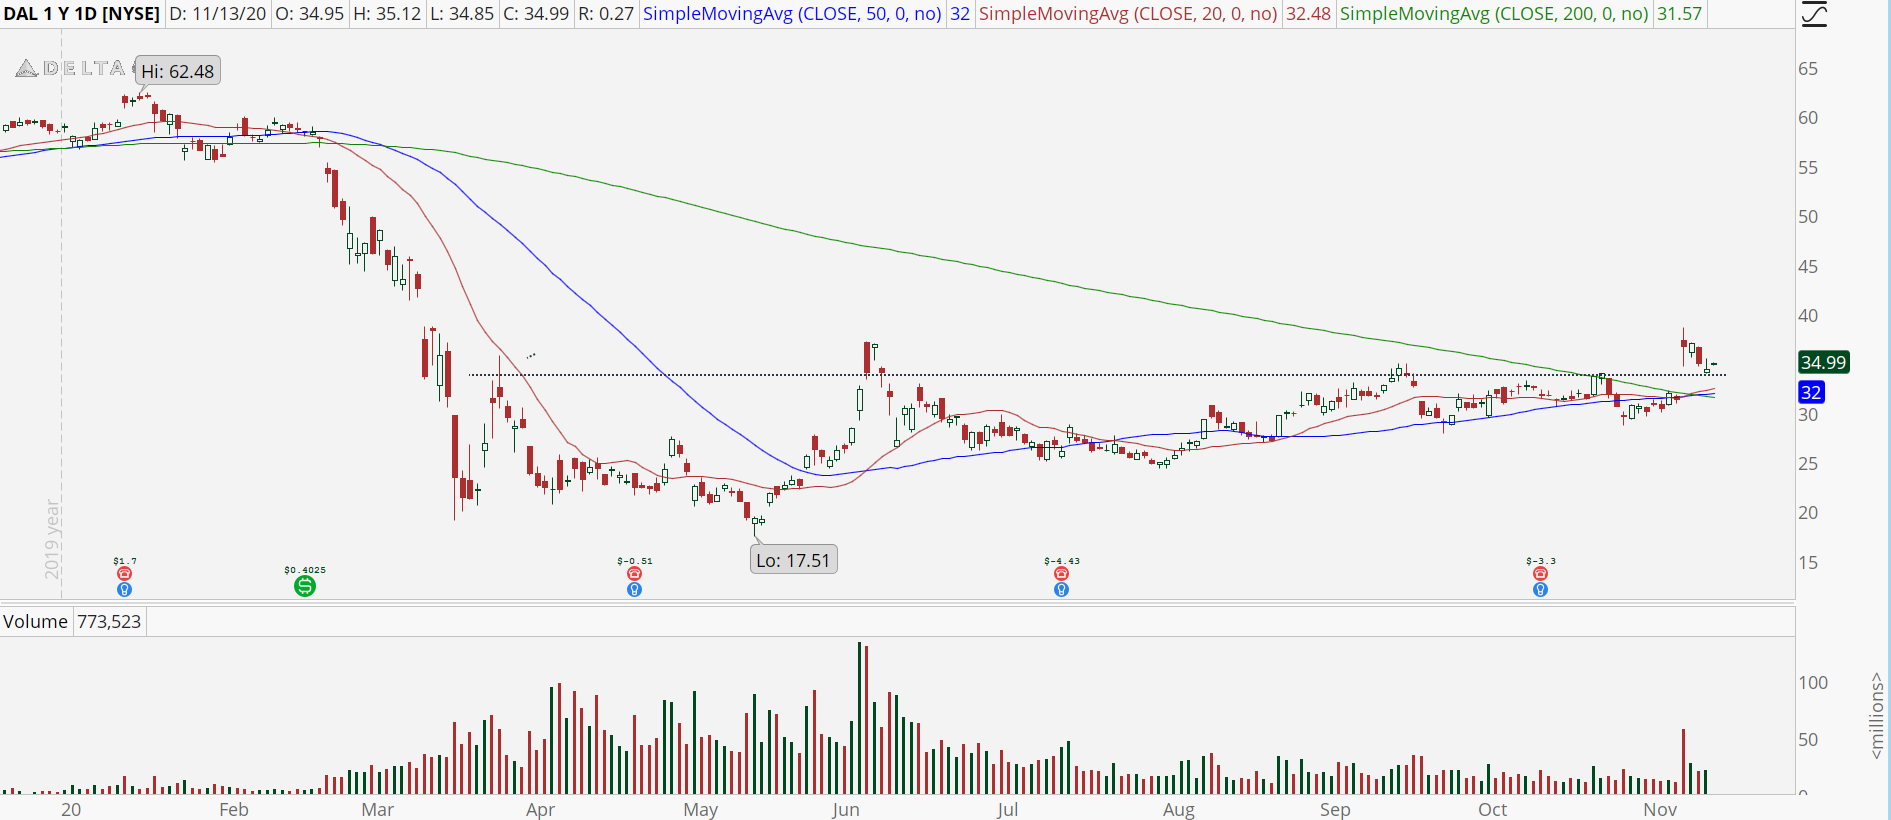 Delta Air Lines (DAL) chart with bull retracement buy setup